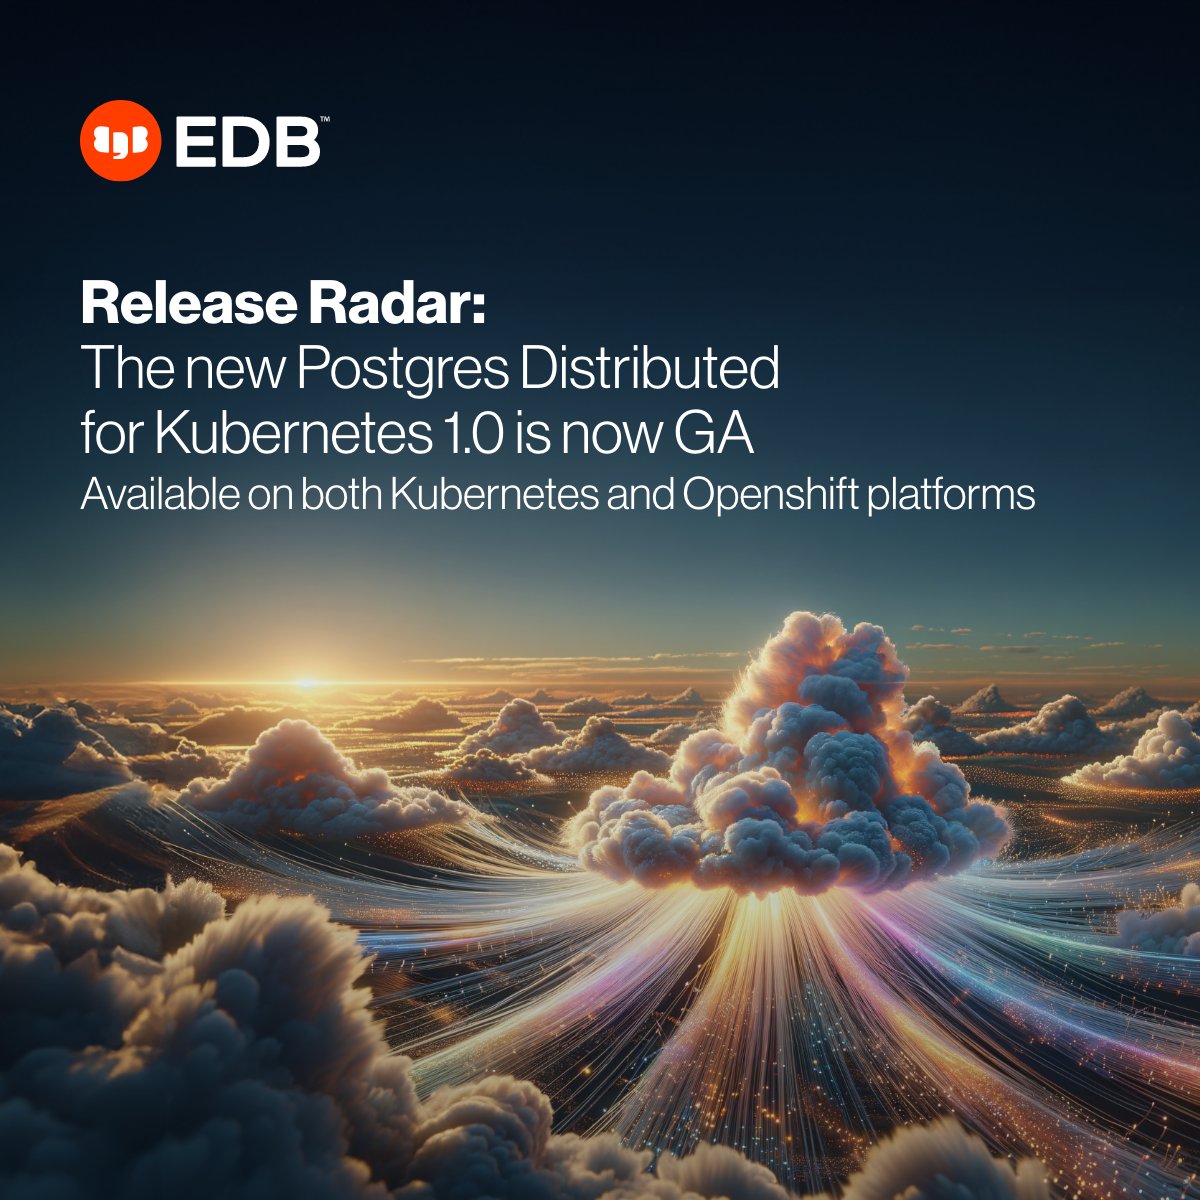 EDB is proud to announce our brand new product, EDB Postgres Distributed for Kubernetes (PGD4K) is now generally available, providing organizations with a solution for an active-active architecture across multiple K8s clusters. Read the full release ➡️ bit.ly/3QhkqEM